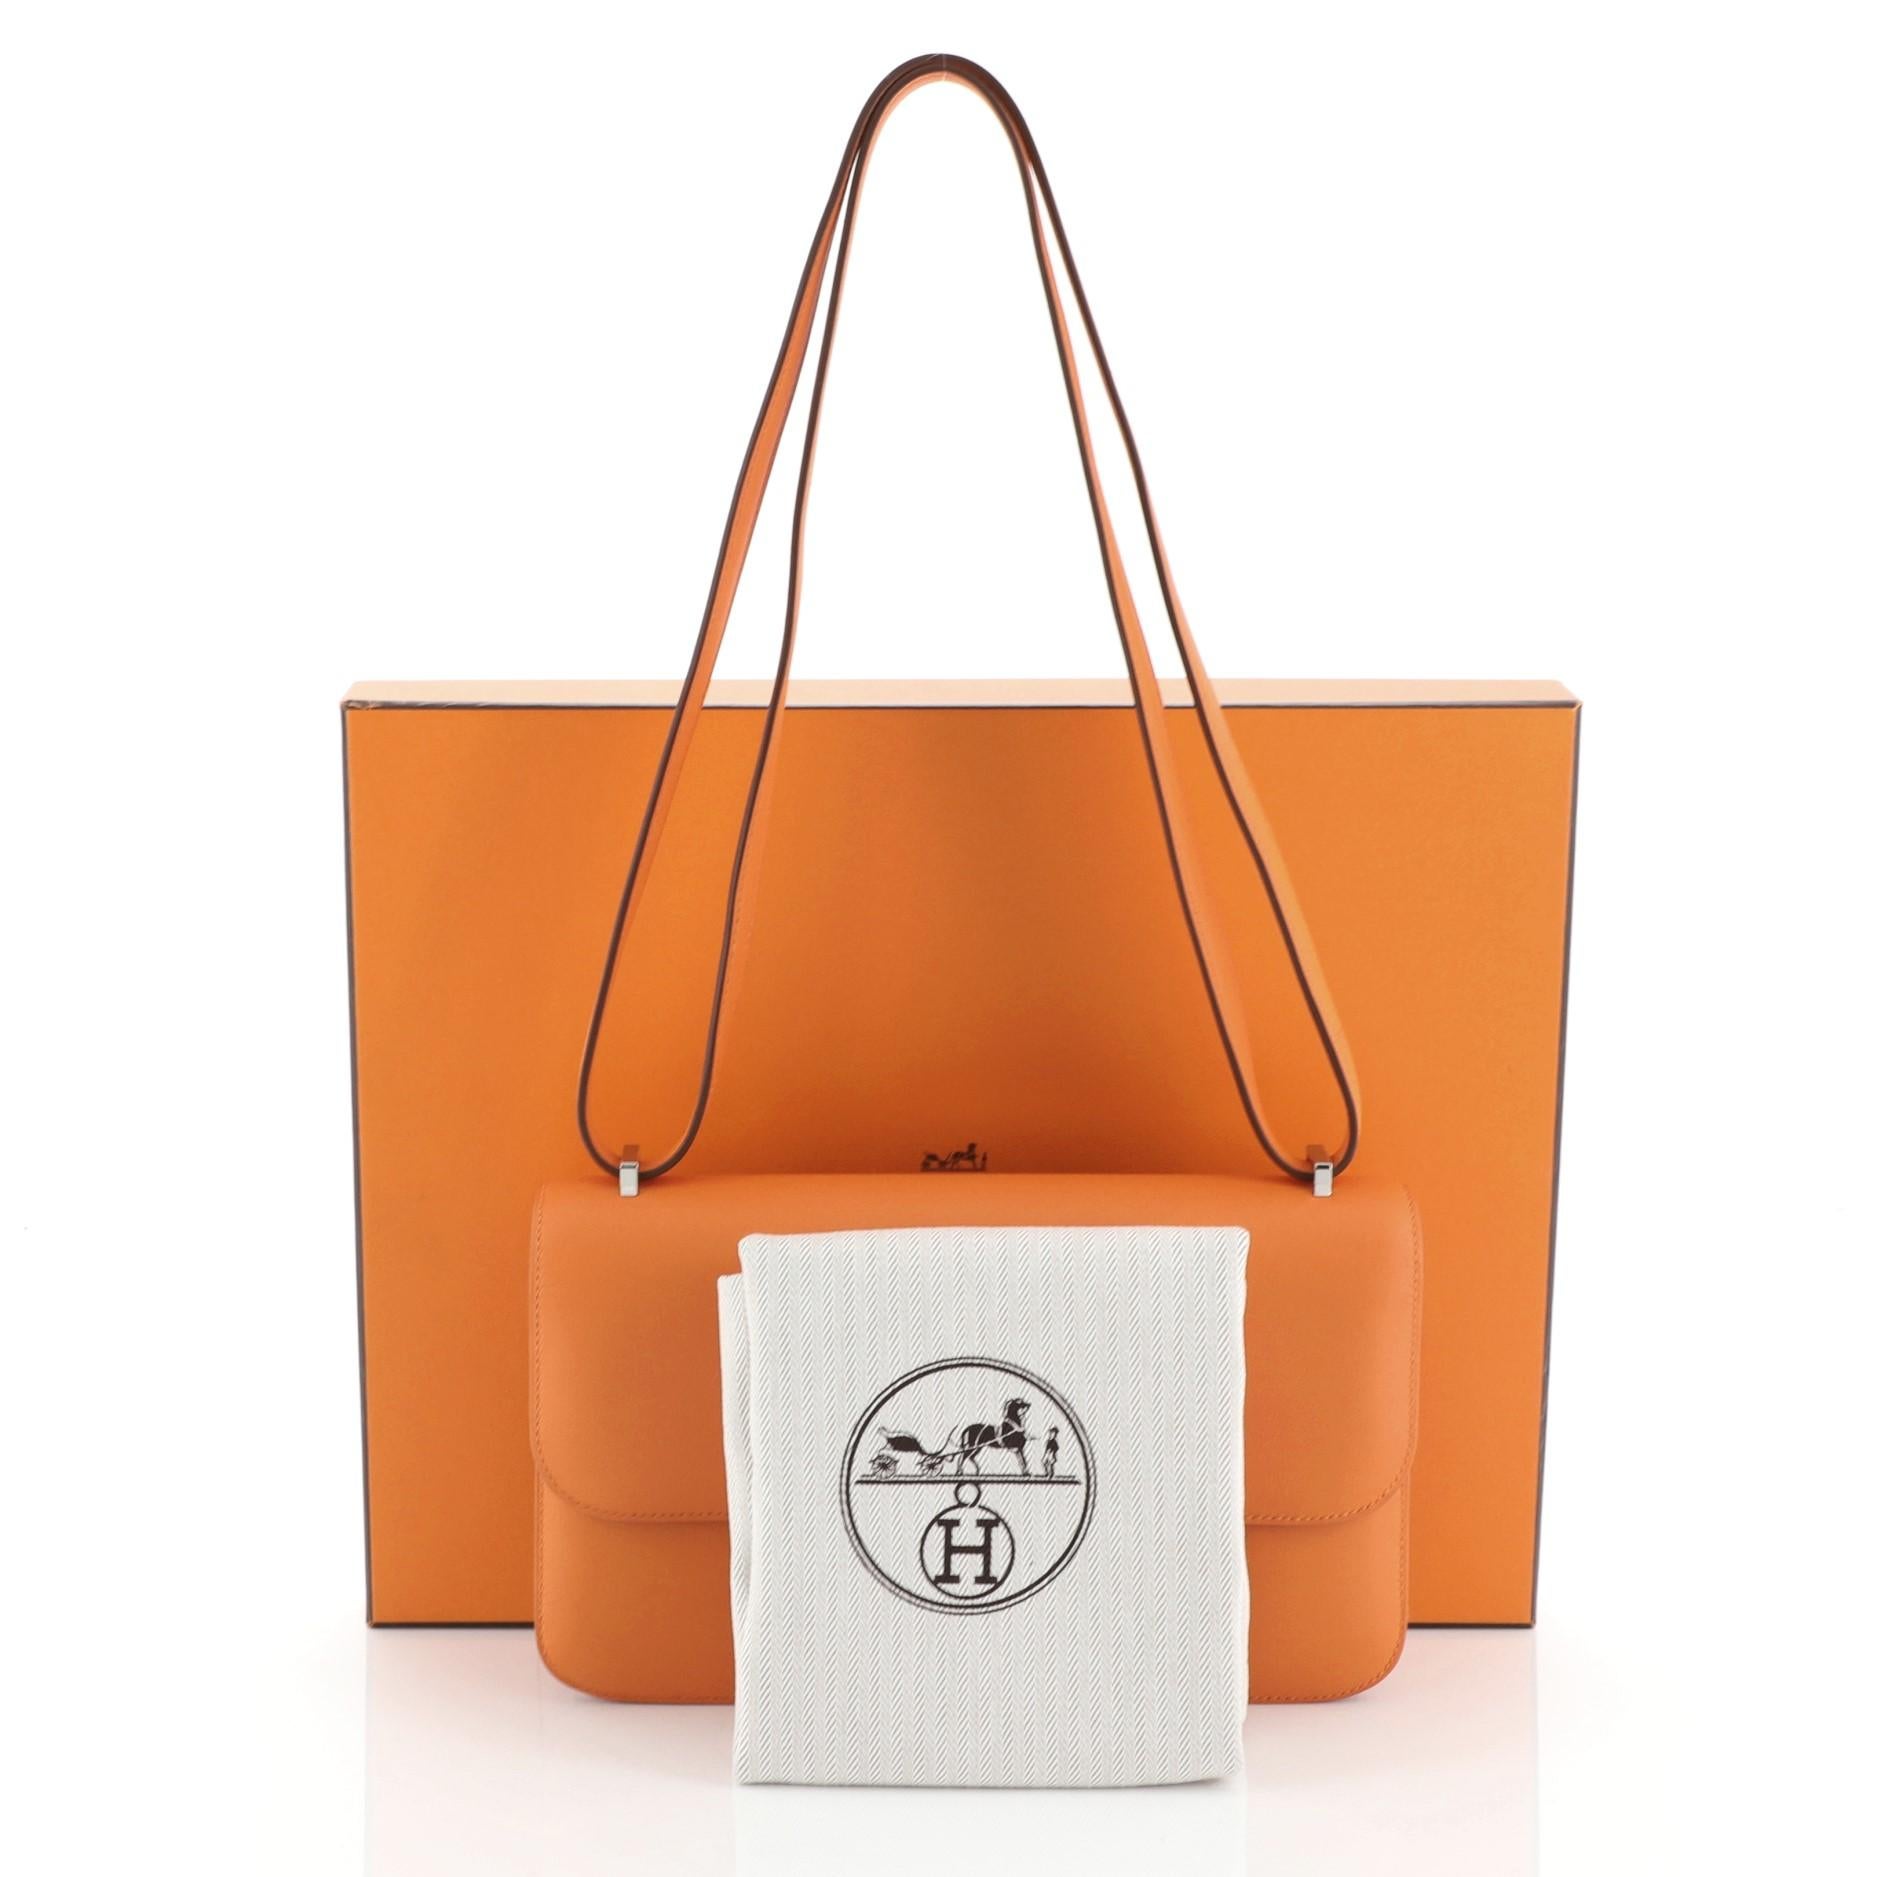 This Hermes Constance Elan Bag Swift 25, crafted from Orange H Swift leather, features a long leather strap and palladium hardware. Its push-lock closure opens to an Orange H Swift leather interior divided into two compartments with zip and slip